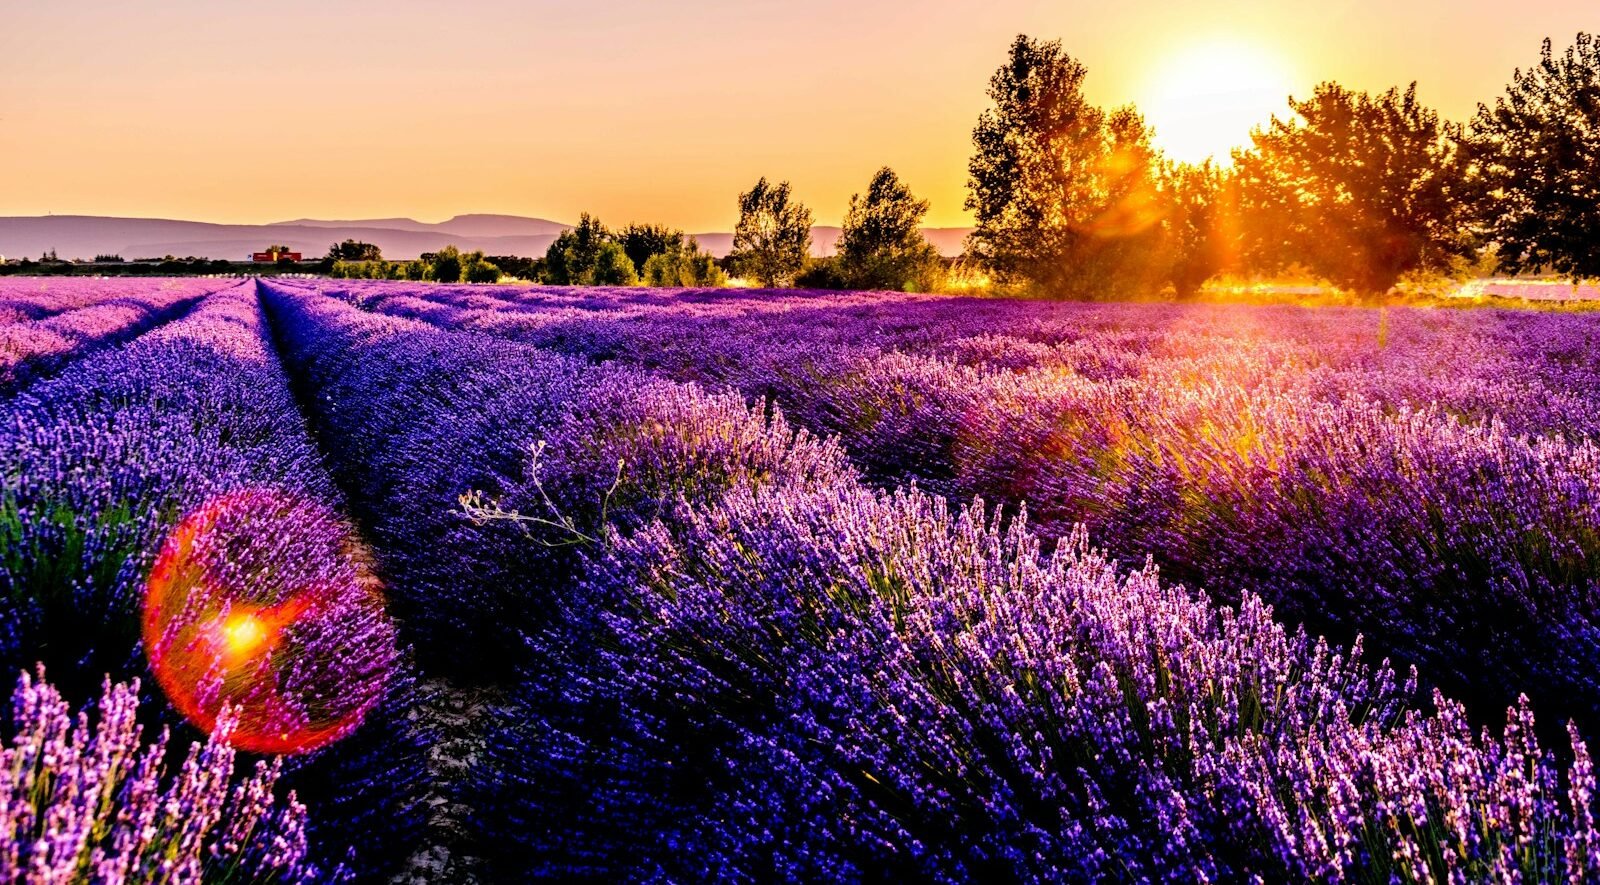 Lavender fields at sunset in Provence.